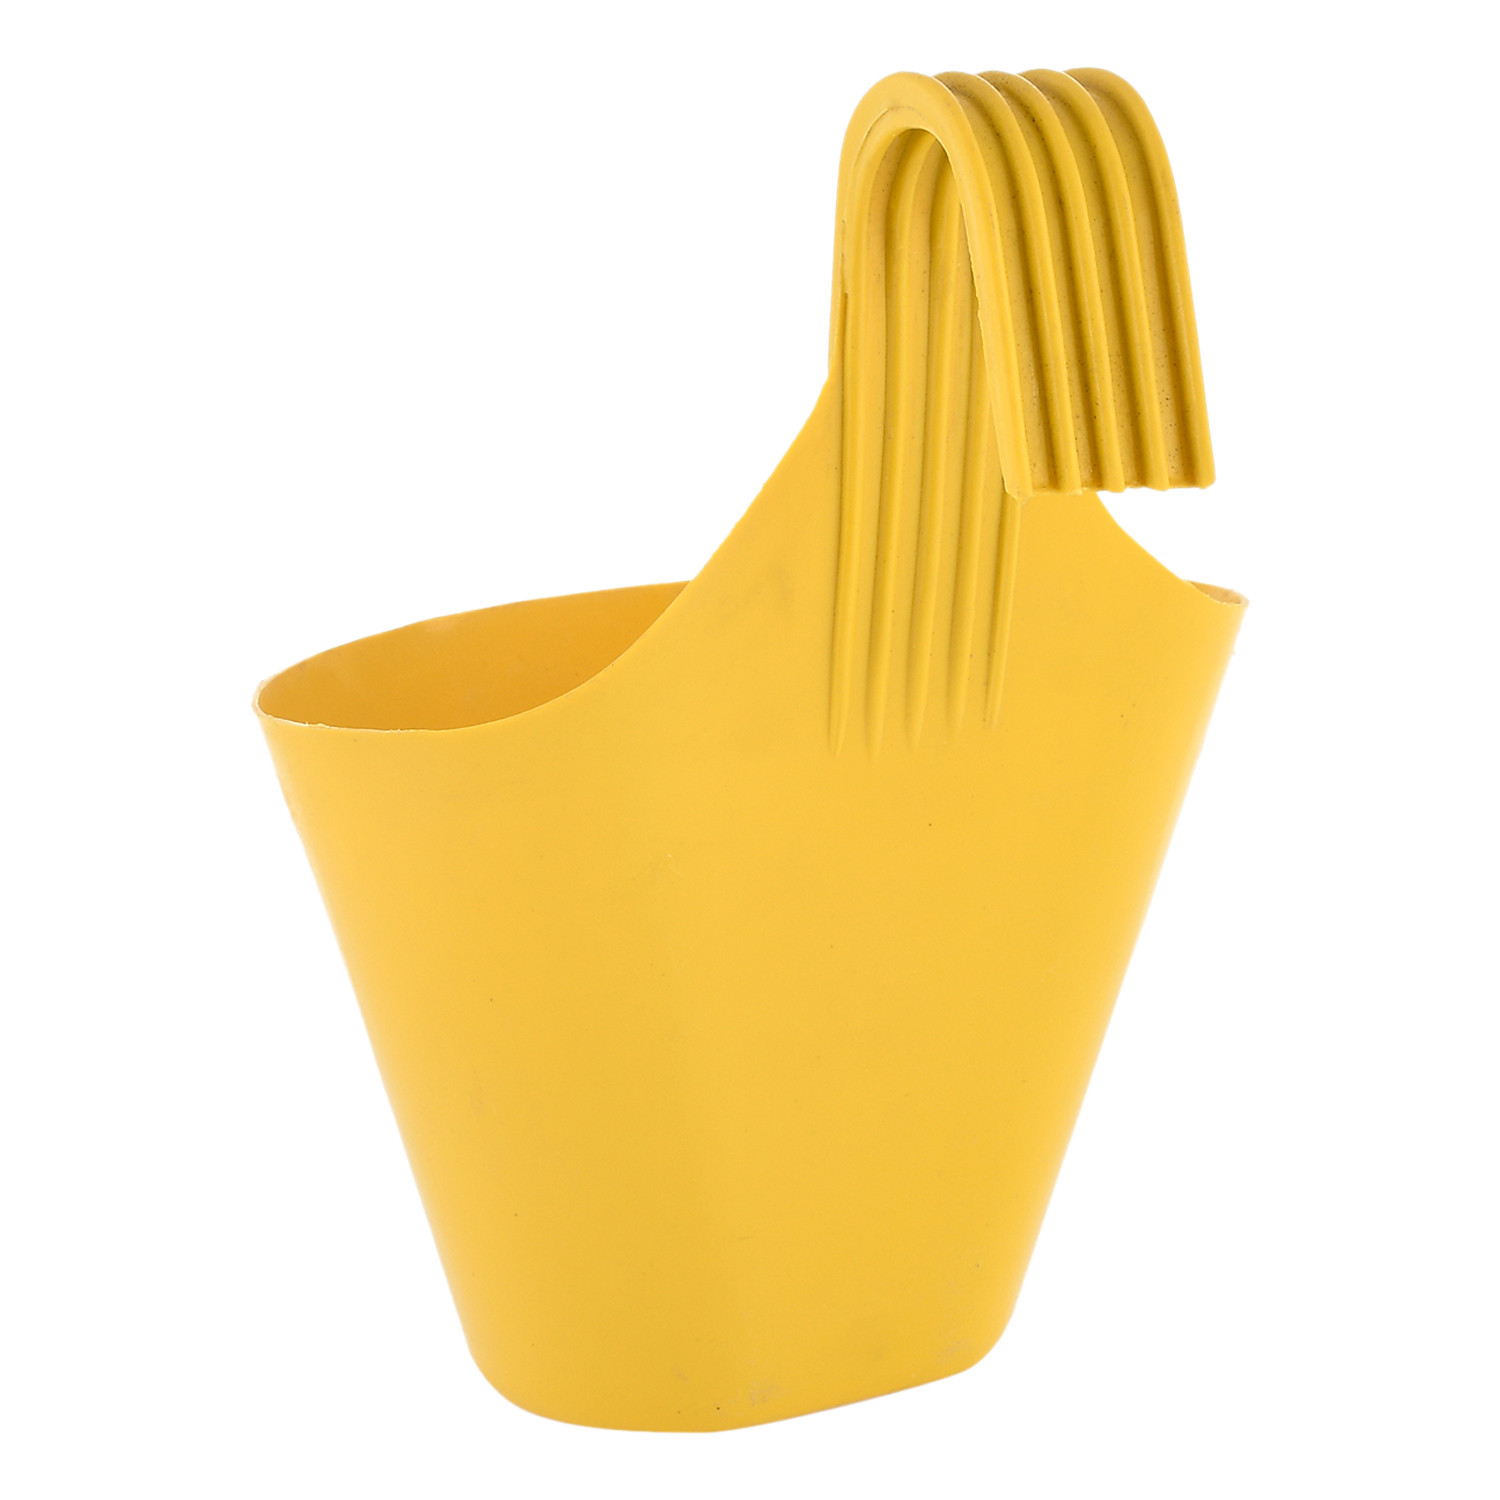 Kuber Industries Hanging Flower Pot|Single Hook Plant Container|Durable Plastic Glossy Finish Pots for Home|Balcony|Garden|9 Inch|(Yellow)